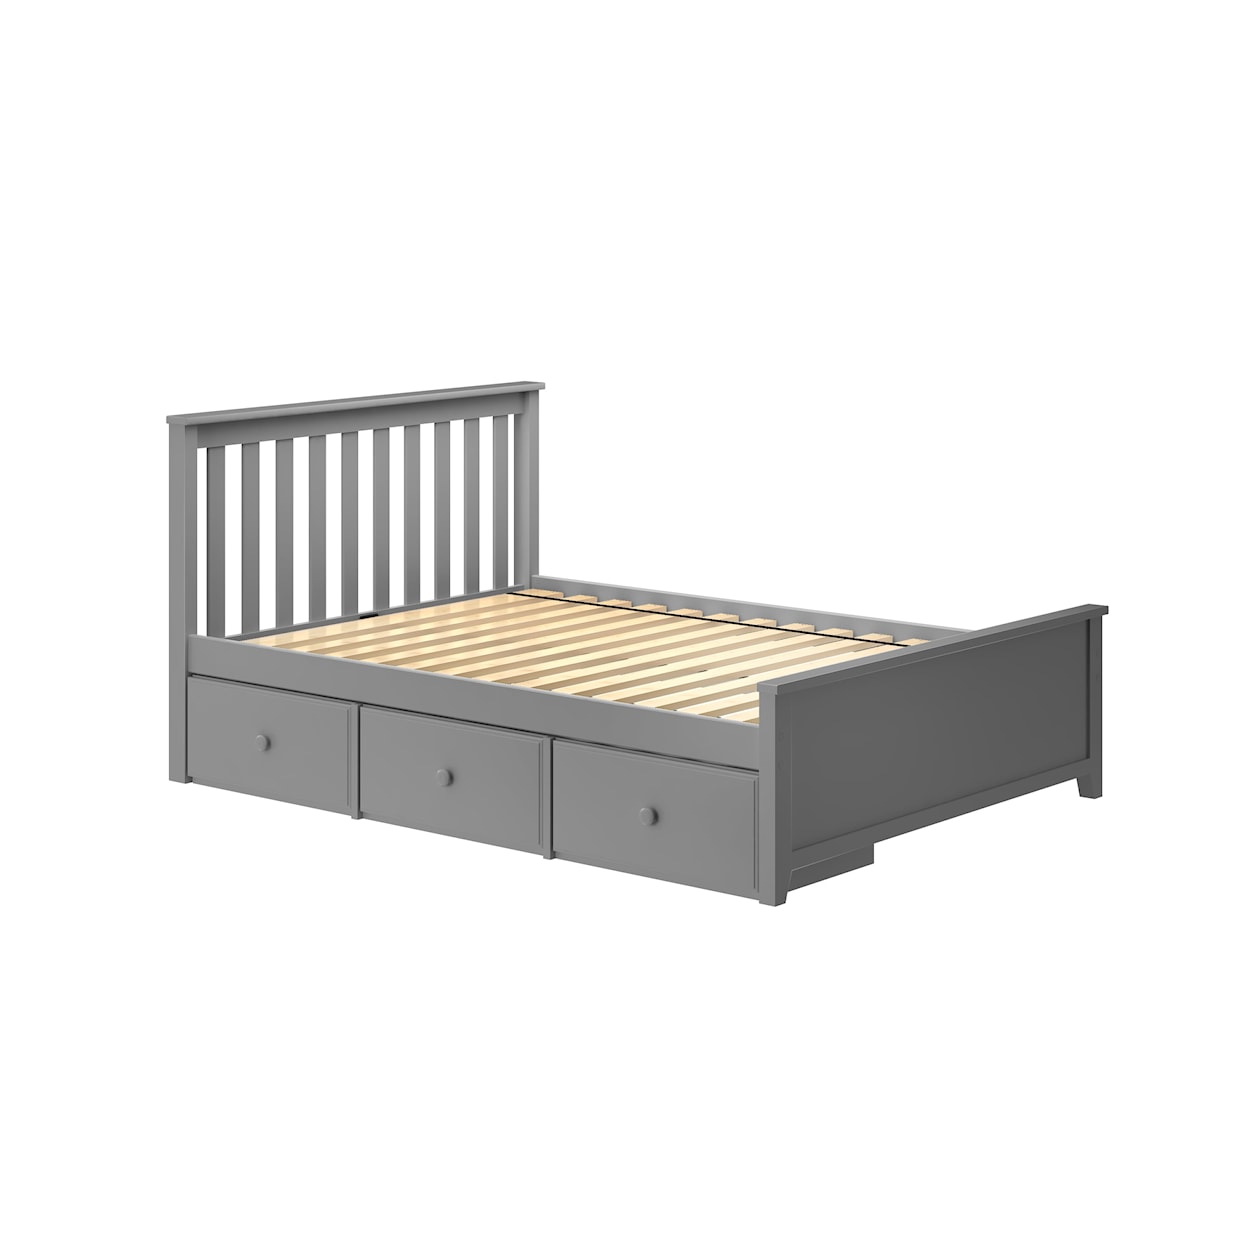 Jackpot Kids Single Beds Dover Youth Full Bed in Grey